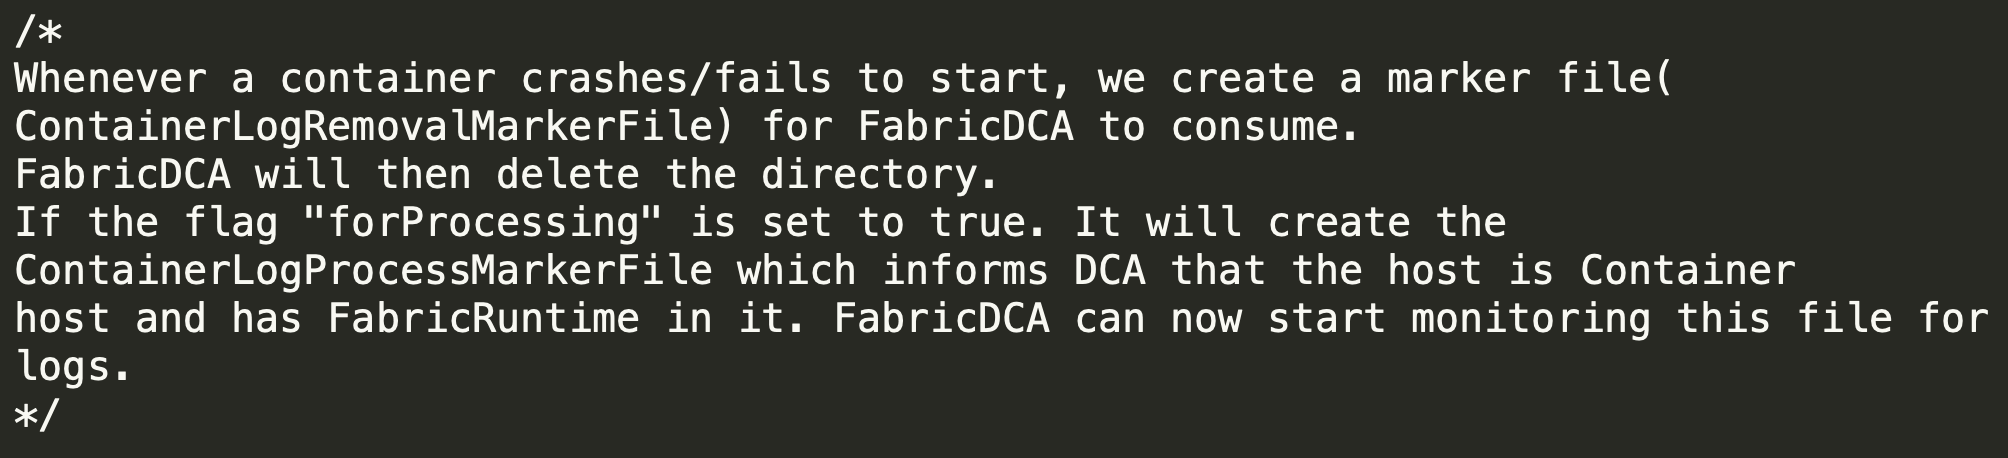 "Whenever a container crashes/fails to start, we create a marker file (ContainerLogRemovalMarkerFile) for FabricDCA to consume. FabricDCA will then delete the directory. If the flag "forProcessing" is set to true. It will create the ContainerLogProcessMarkerFile which informs DCA that the host is Container host and has FabricRuntime in it. FabricDCA can now start monitoring this file for logs."